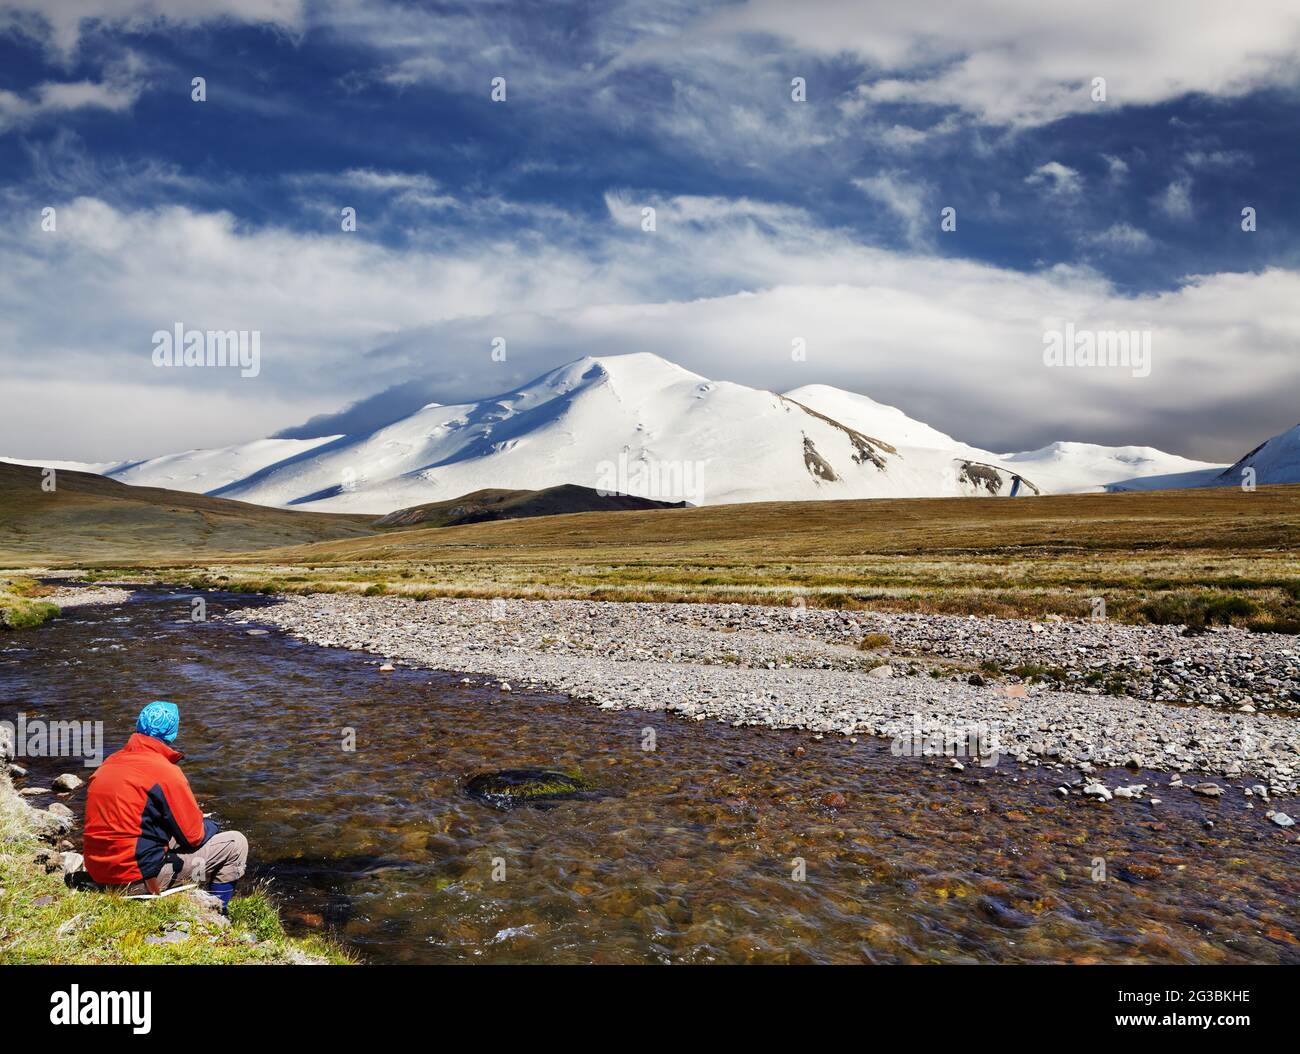 Man sitting alone on the river bank against snowy mountain and blue sky background, travel concept Stock Photo